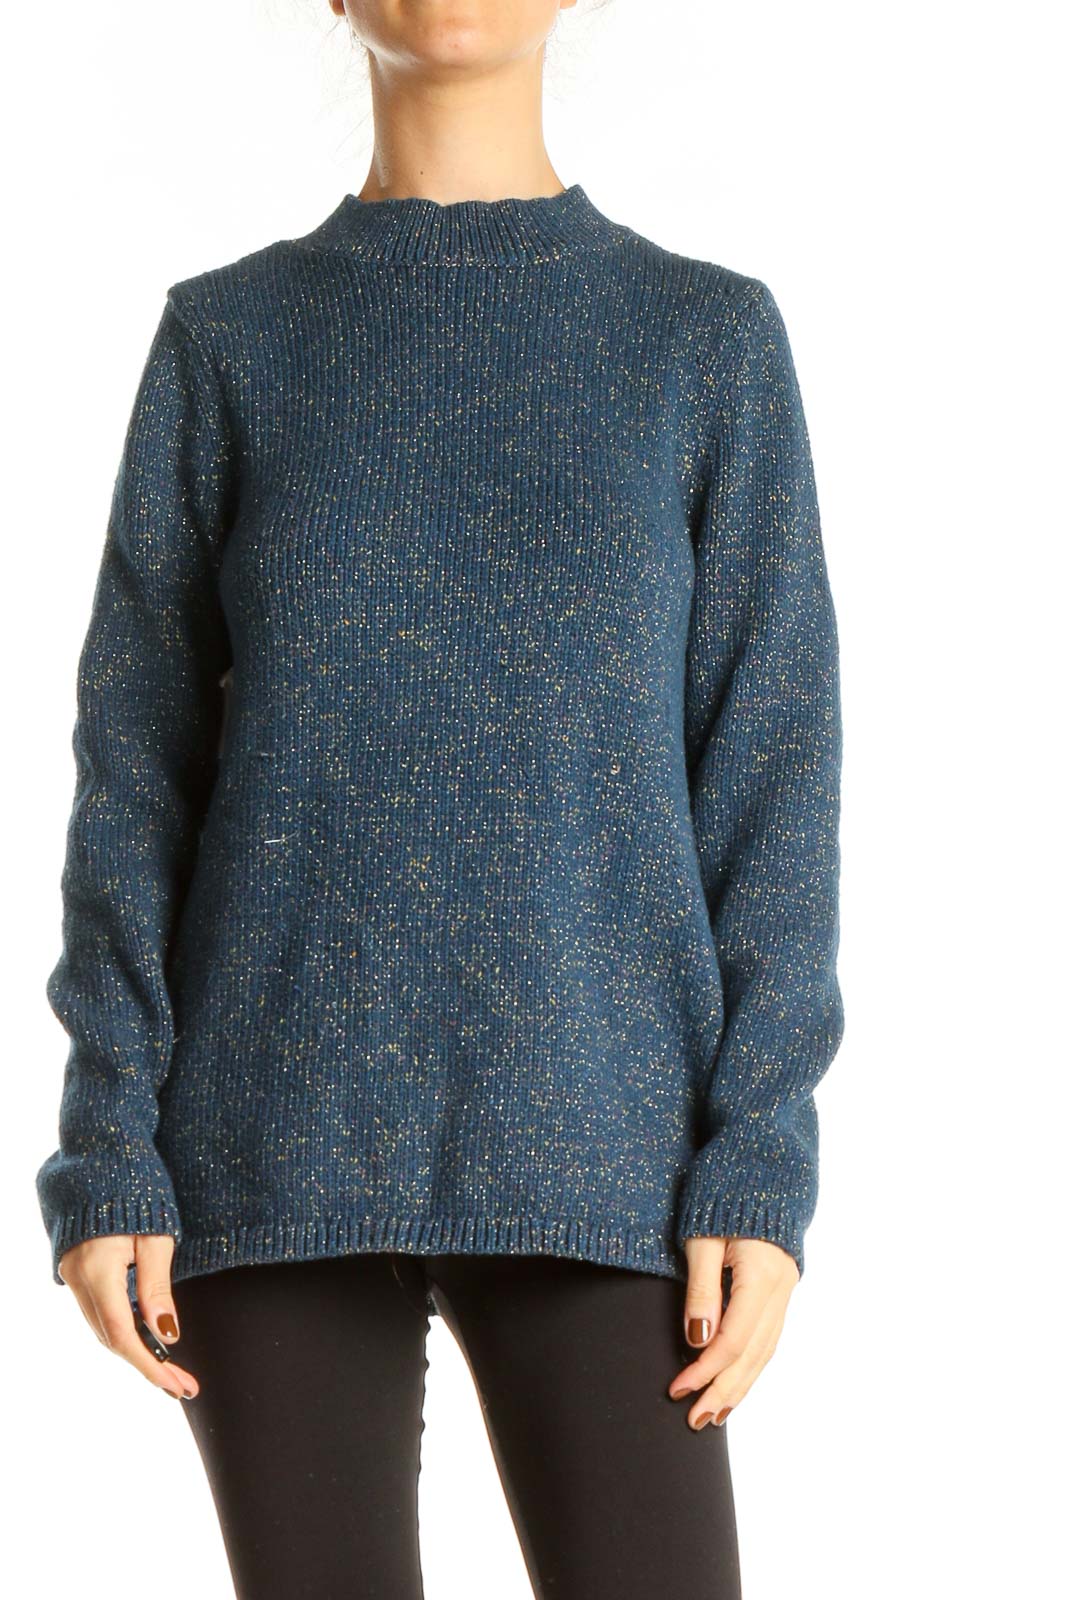 Blue All Day Wear Sweater Front